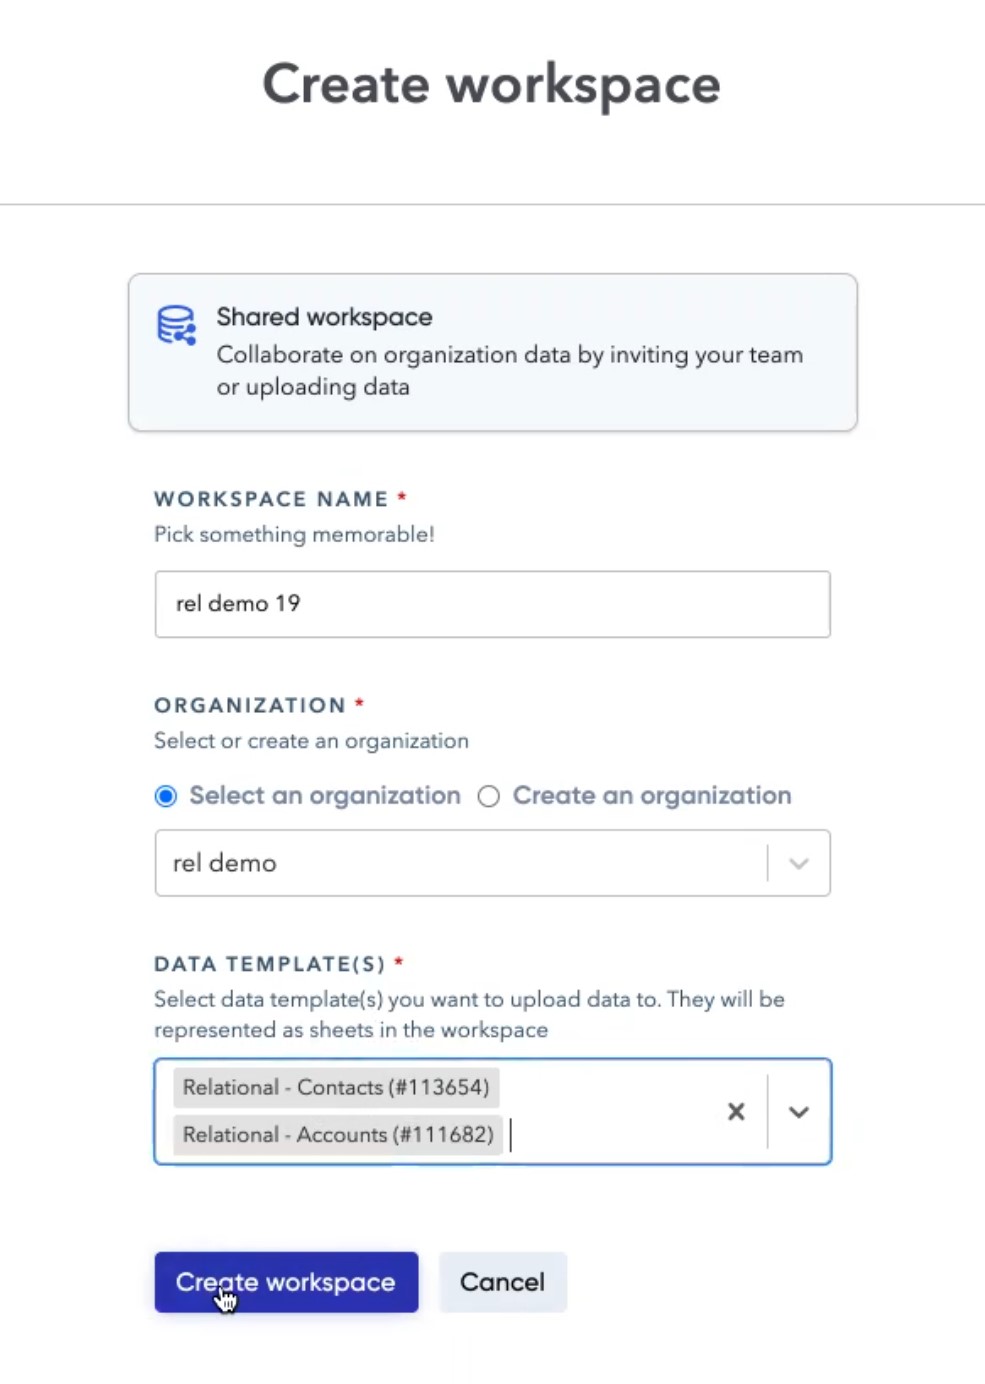 create workspaces screen with linked data templates